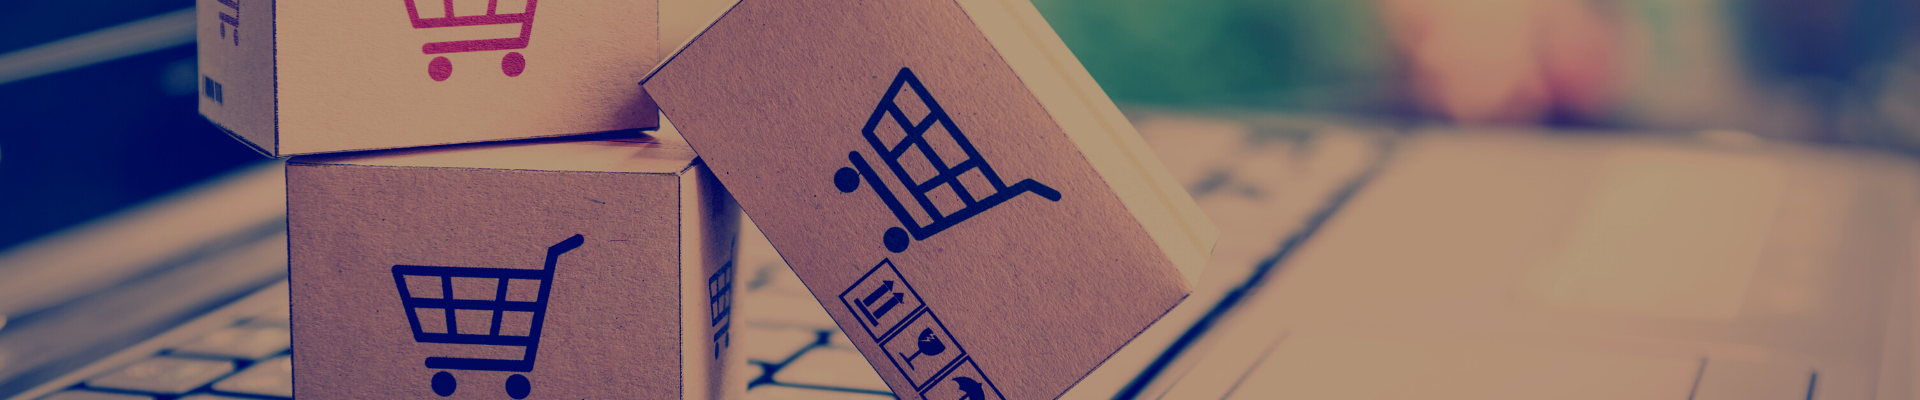 Little packages in a trolley on a laptop to indicate ecommerce